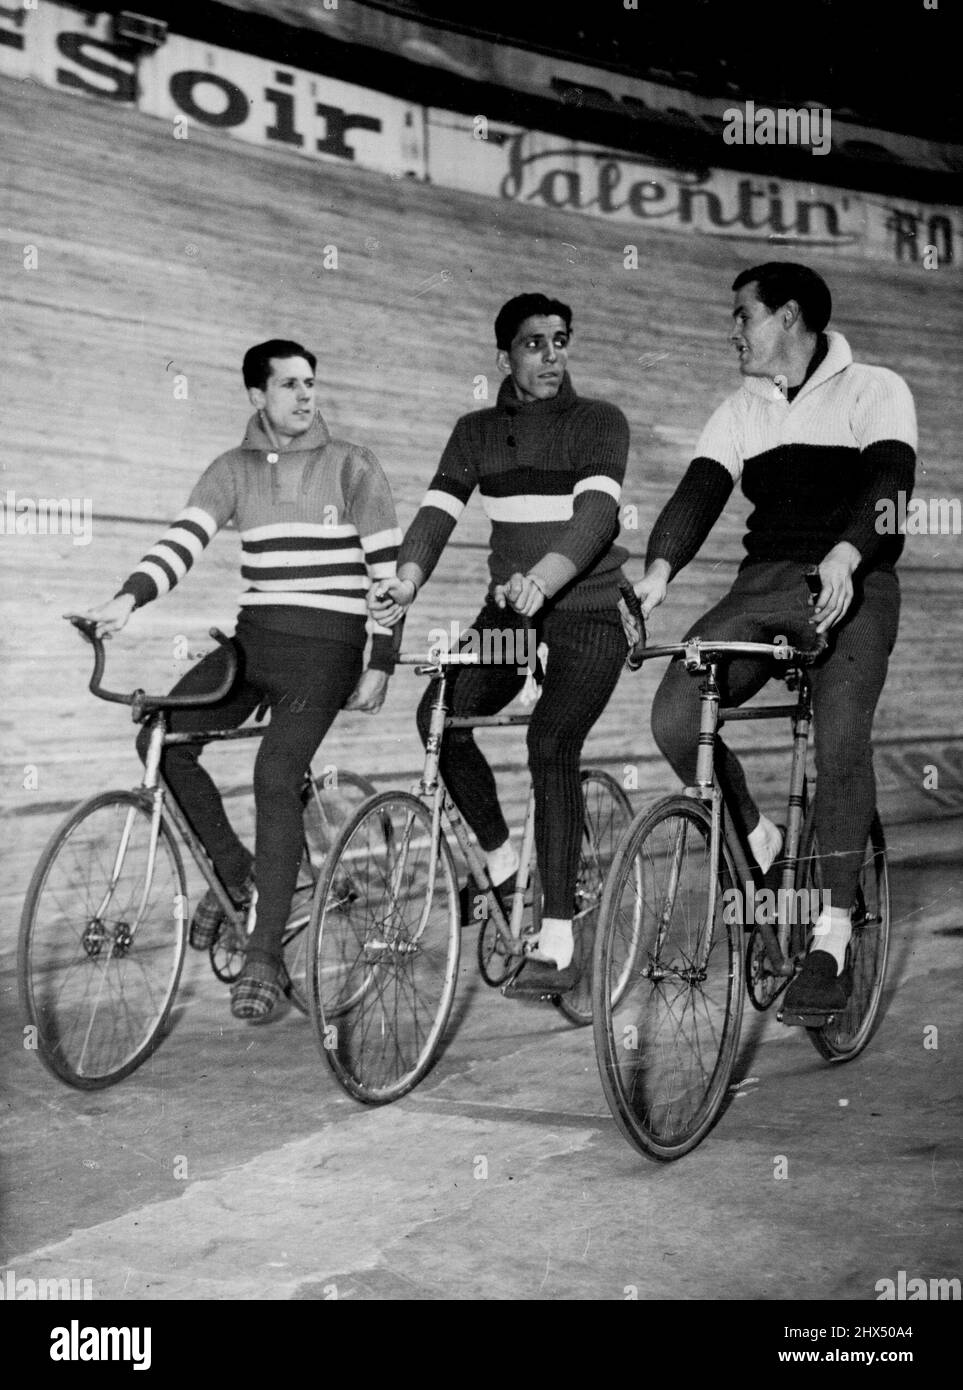 Six-Day Cycle Race In Paris -- Left to Right ; Alfred Strom of Australia; Gerit Peters of Haarlem, Holland, and Armin Von Buren of Zurich, Switzerland, make a leisurely turn around the Velodrome D'hiver, Mar. 18 in the six day cycle race in Paris, France. Australian cyclist Alf Strom (left) takes a leisurely turn around the Velodrome D'hiver during the recent six-day in Paris. Strom's companions are Gerit Peters (Holland) and Armin von Buren (Switzerland). March 20, 1950. (Photo by Associated Press Photo). Stock Photo